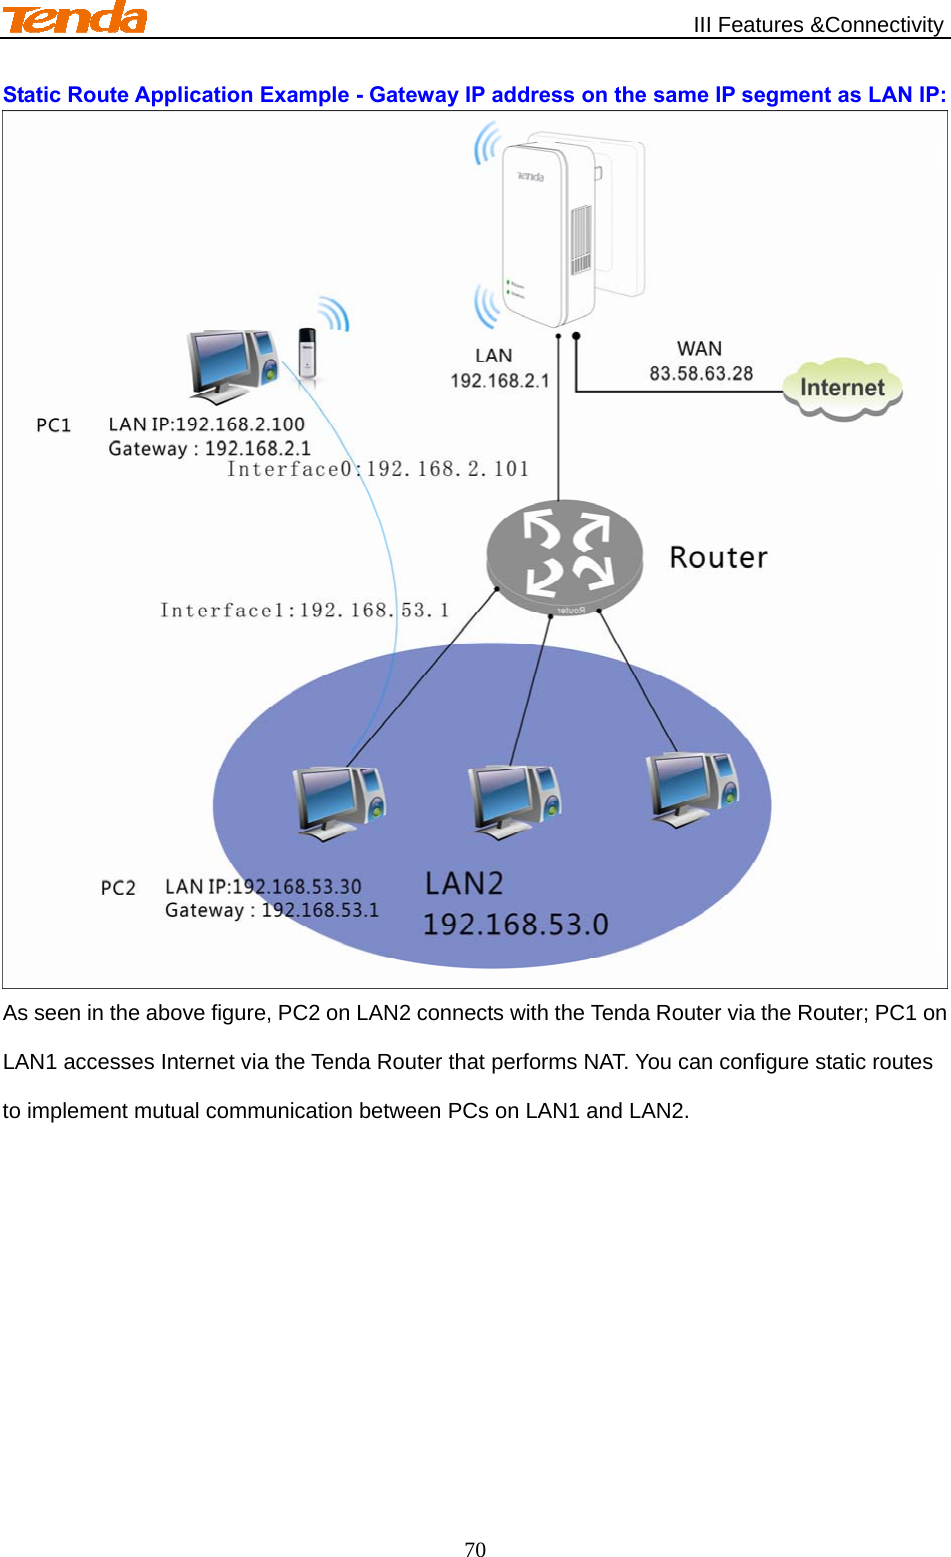                                                   III Features &amp;Connectivity 70 Static Route Application Example - Gateway IP address on the same IP segment as LAN IP:  As seen in the above figure, PC2 on LAN2 connects with the Tenda Router via the Router; PC1 on LAN1 accesses Internet via the Tenda Router that performs NAT. You can configure static routes to implement mutual communication between PCs on LAN1 and LAN2. 